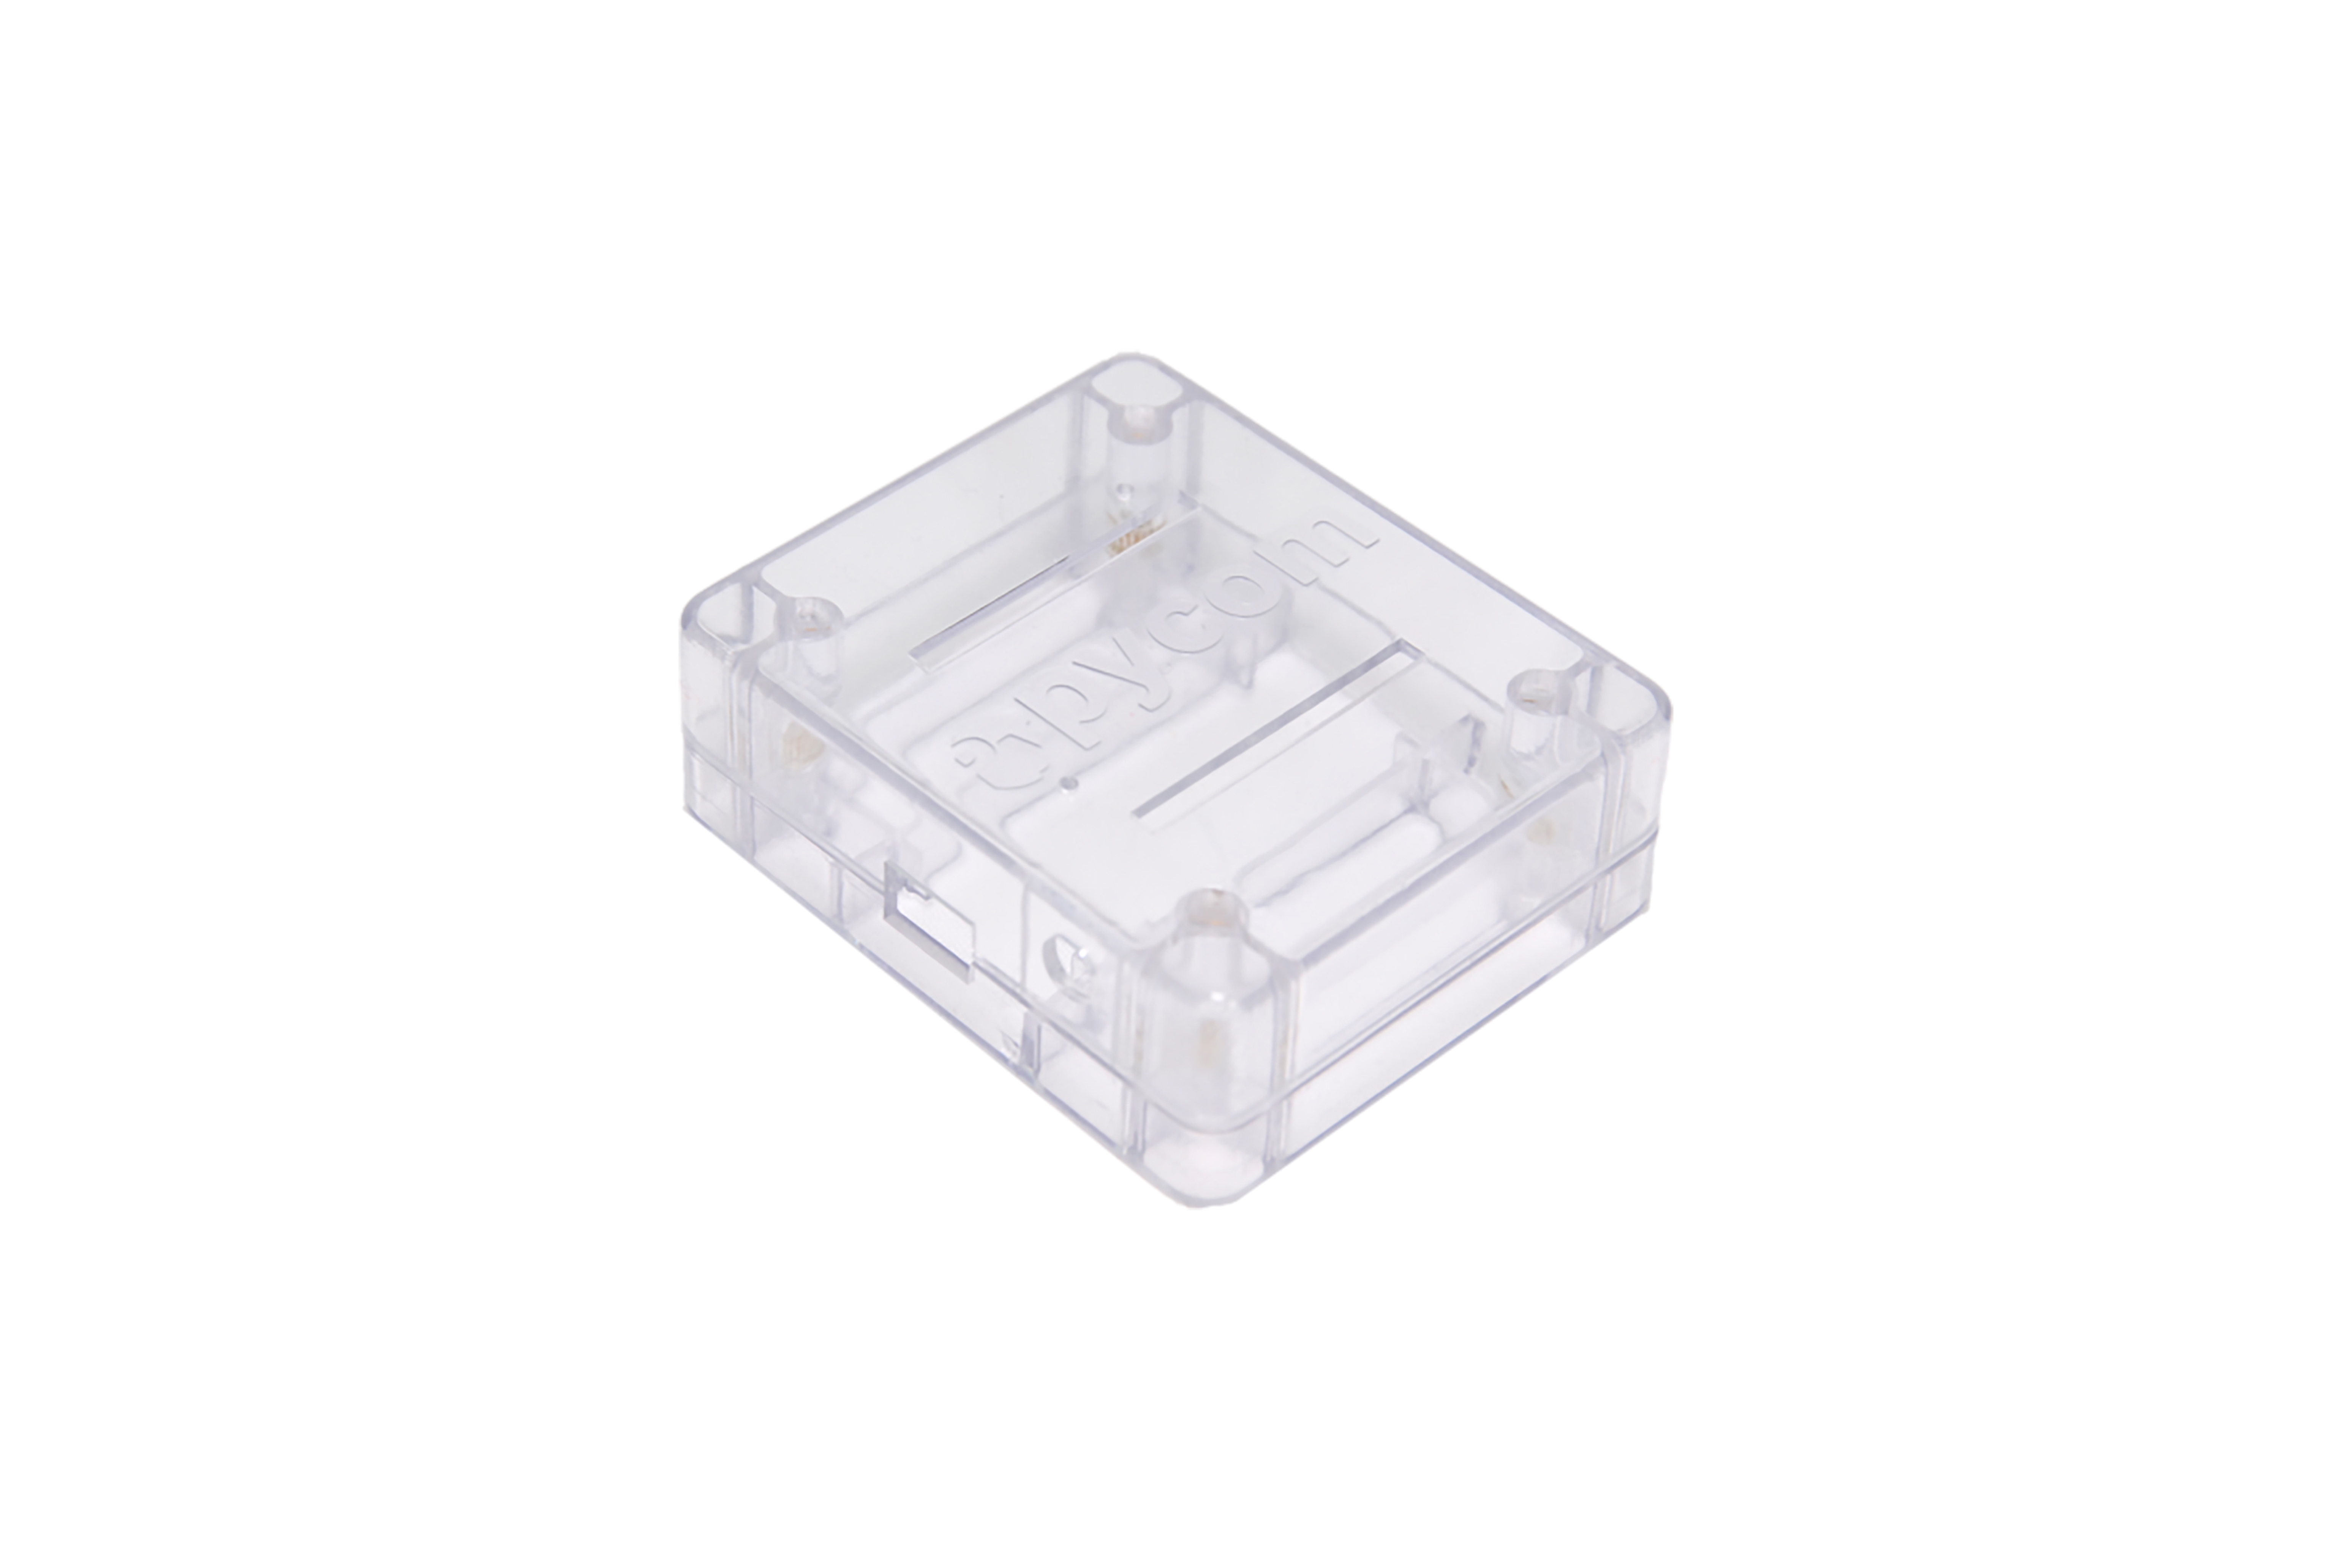 Case For Wipy/Lopy/Sipy Boards - Clear